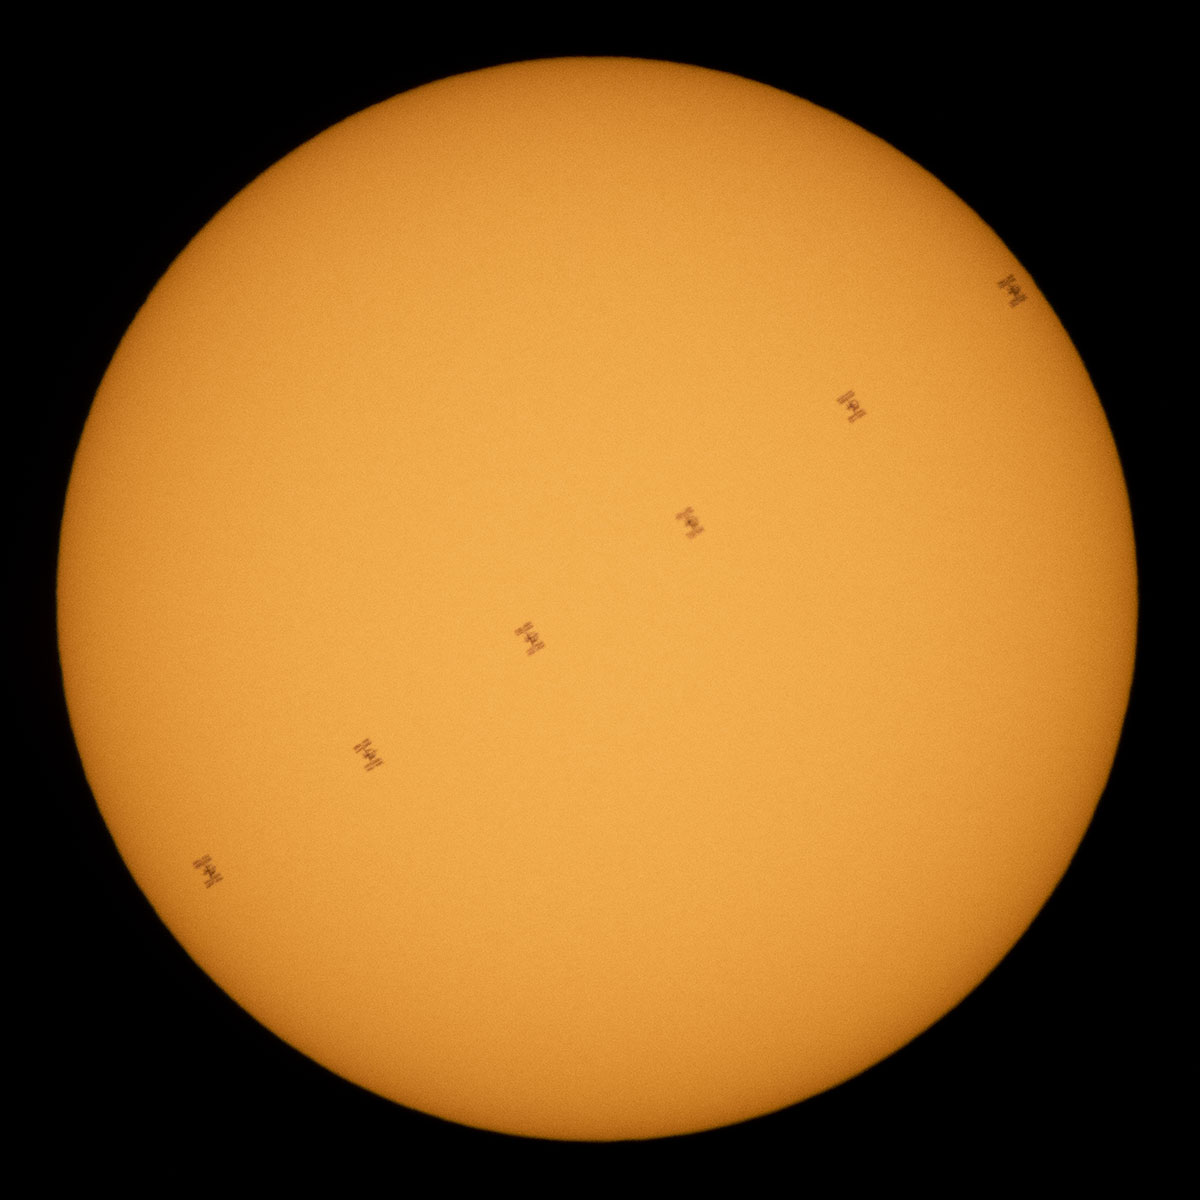 The International Space Station can be seen transiting an orange Sun in this combined photo.